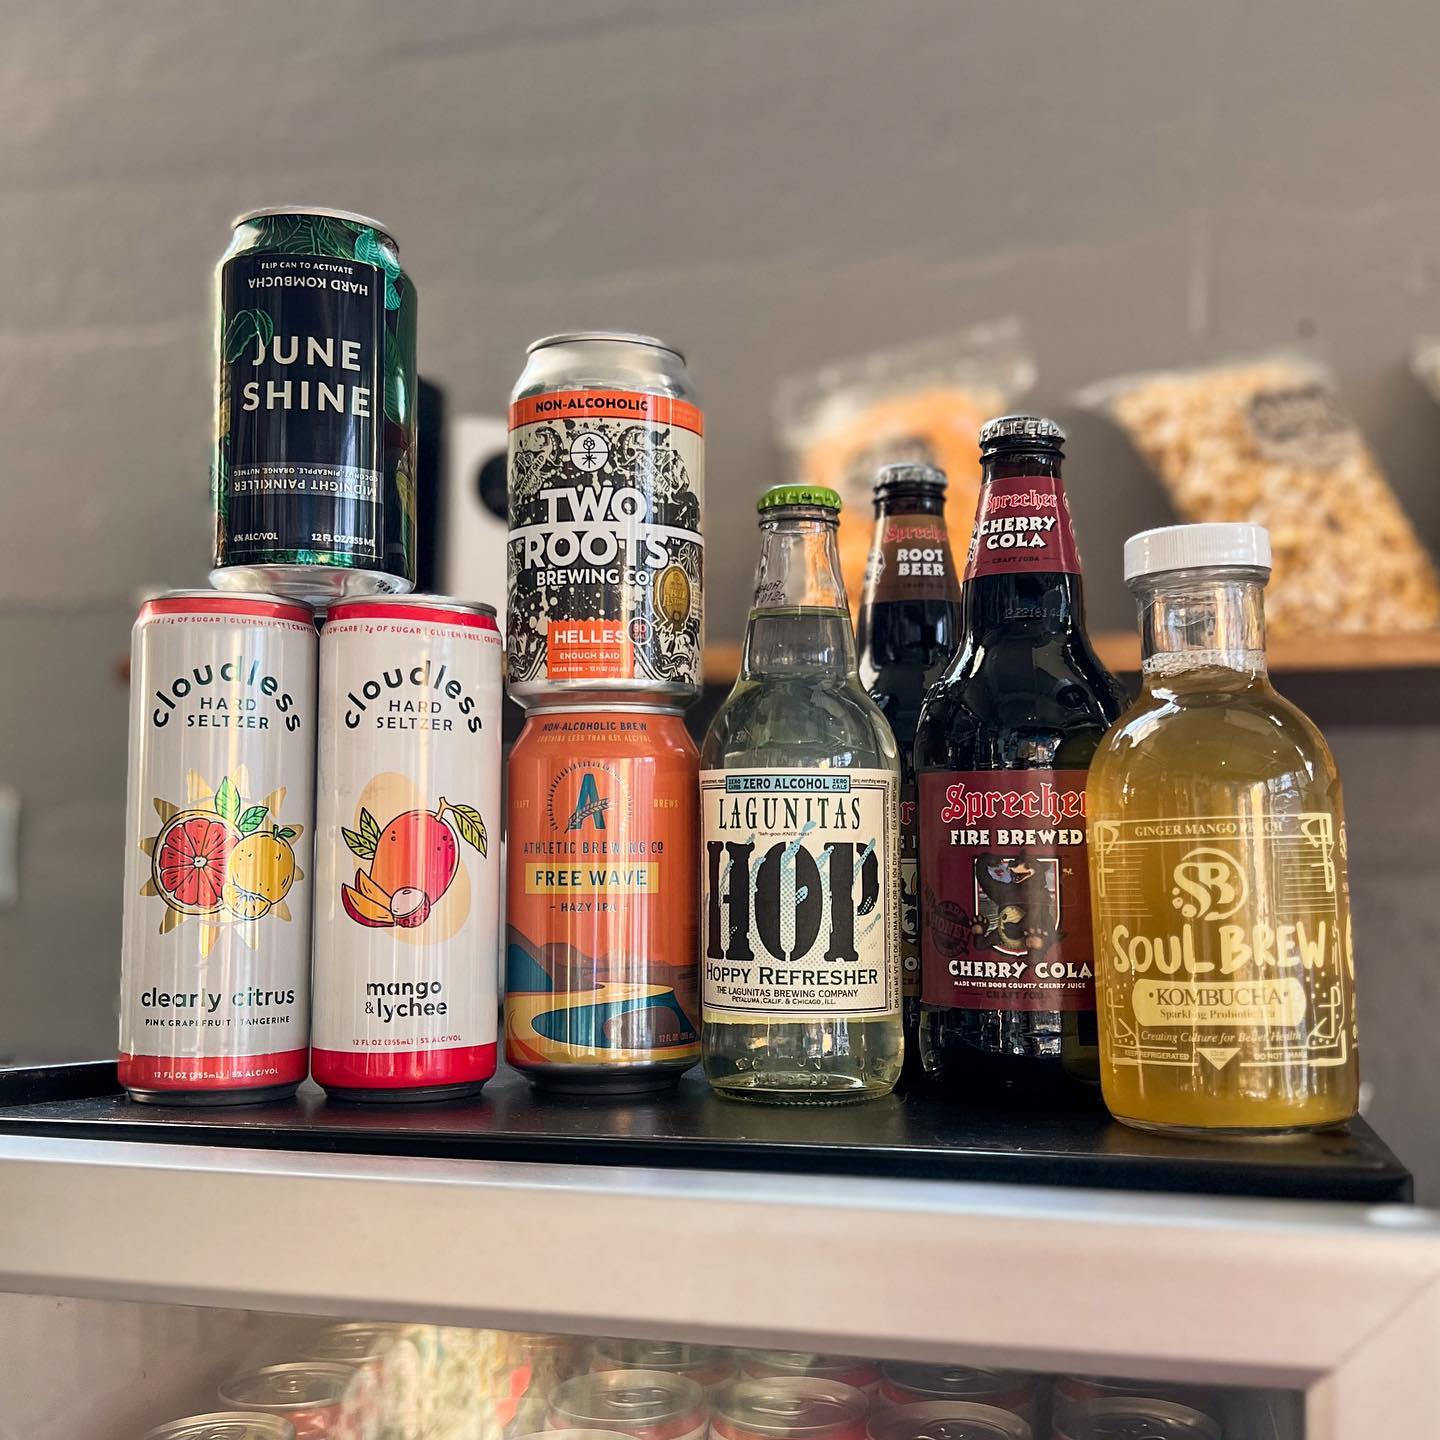 🚨Attention all “my friends dragged me to a brewery and I don’t like beer” people, gluten free friends and those that just don’t feel like drinking today, we are very excited to introduce some brand new NA and alcoholic alternative options in the taproom! From non-alcoholic craft beers and soda, to hard kombucha and craft seltzers, we got you!🍹 Stop in the taproom today at 3 for happy hour! Don’t worry, we’ve still got plenty of beer to go around🍻

#nabeer #alcoholfree #glutenfree #beeralternatives #wevestillgotthebeer #naoptions #milwaukee  #newbeer #taproom #friday #weekend  #bayview  #drinklocal #craftbeer